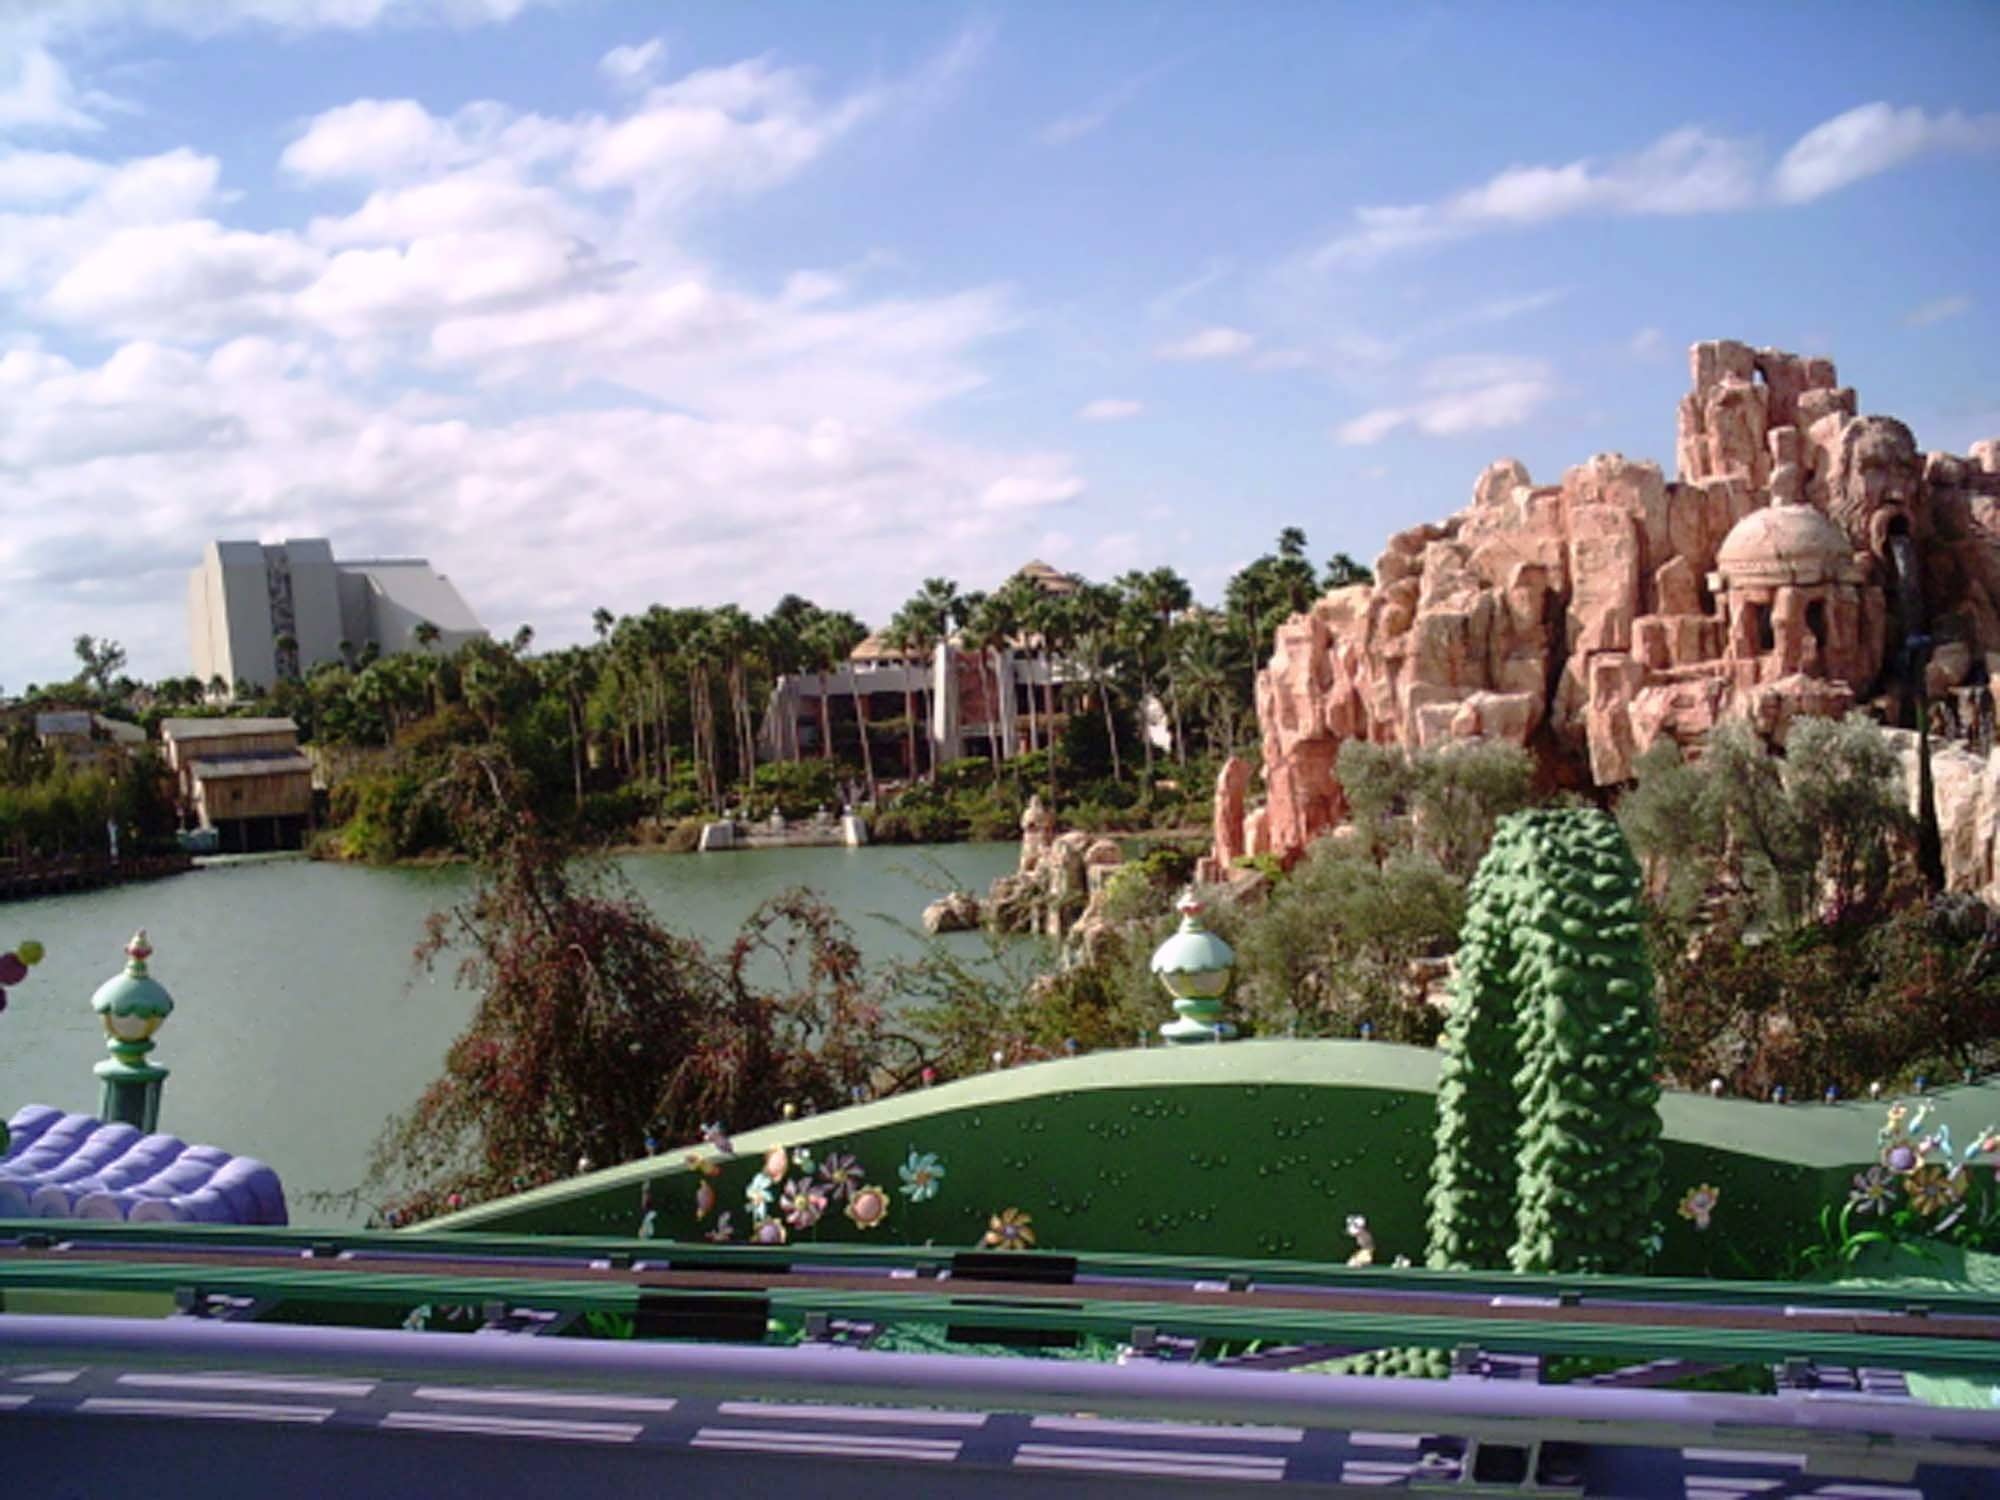 Dwelling on Universal's Islands of Adventure, 20 years later – Orlando  Sentinel